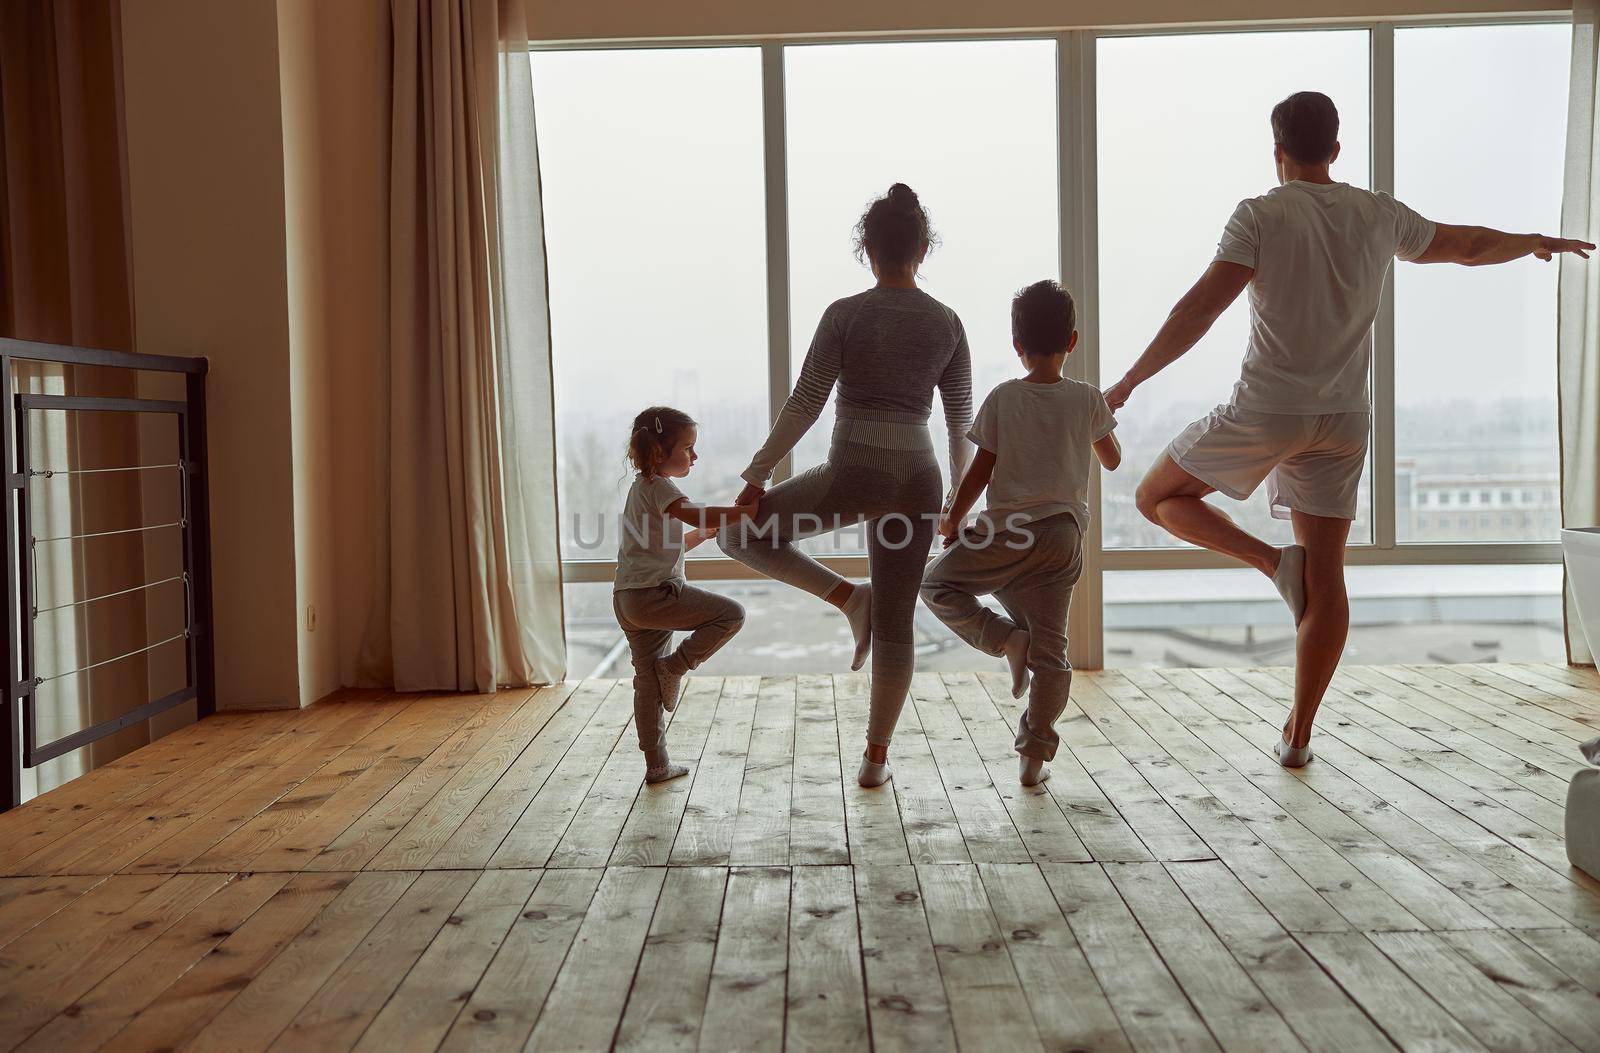 Sporty parents with son and daughter are standing on one foot in asna with faces to window